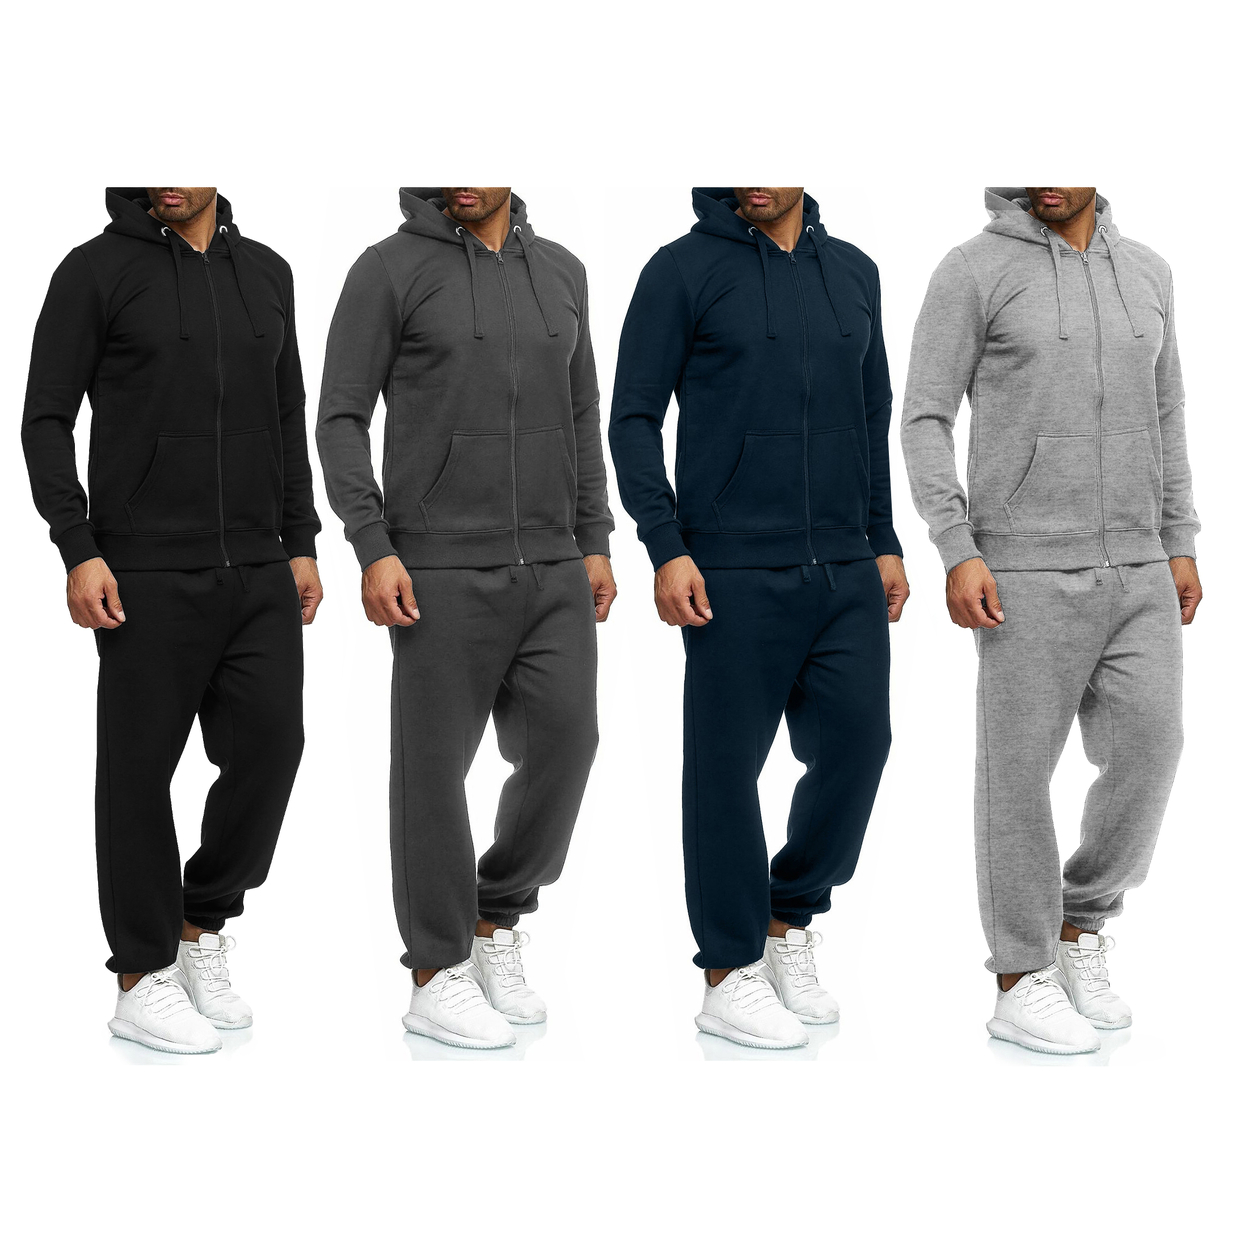 2-Pack: Men's Casual Big & Tall Athletic Active Winter Warm Fleece Lined Full Zip Tracksuit Jogger Set - Black, Xx-large